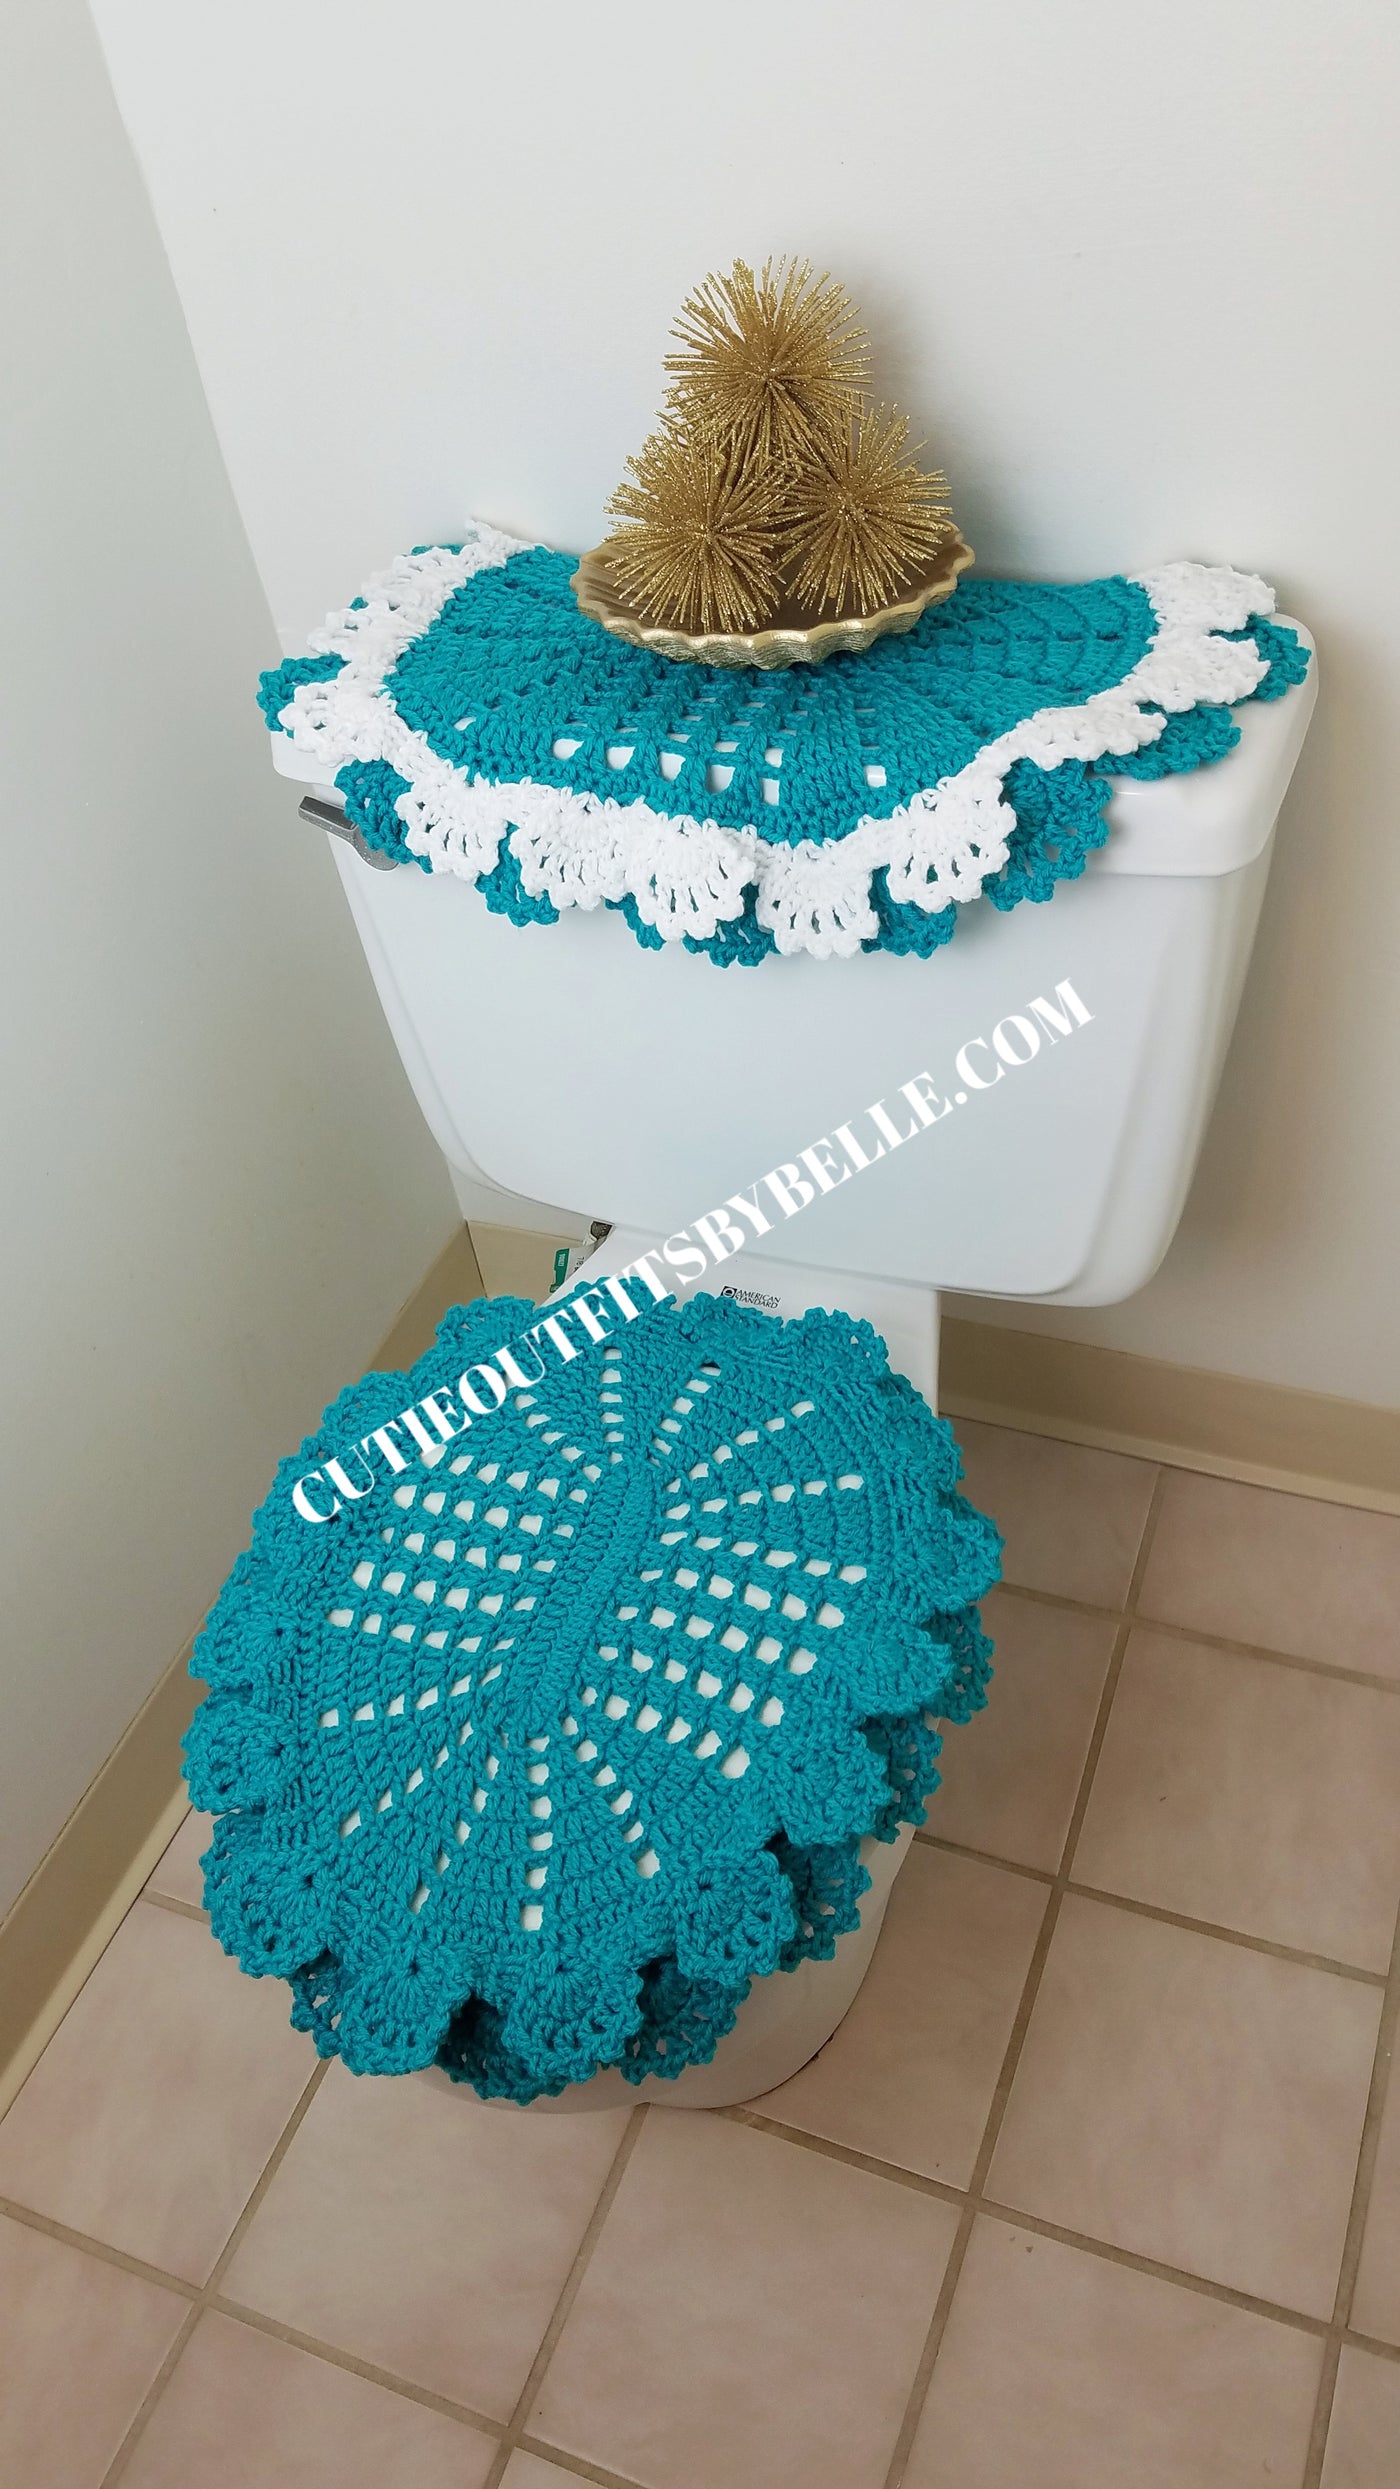 Teal Bathroom Decor, Toilet Seat Cover, Lid Cover for Toilet Seat